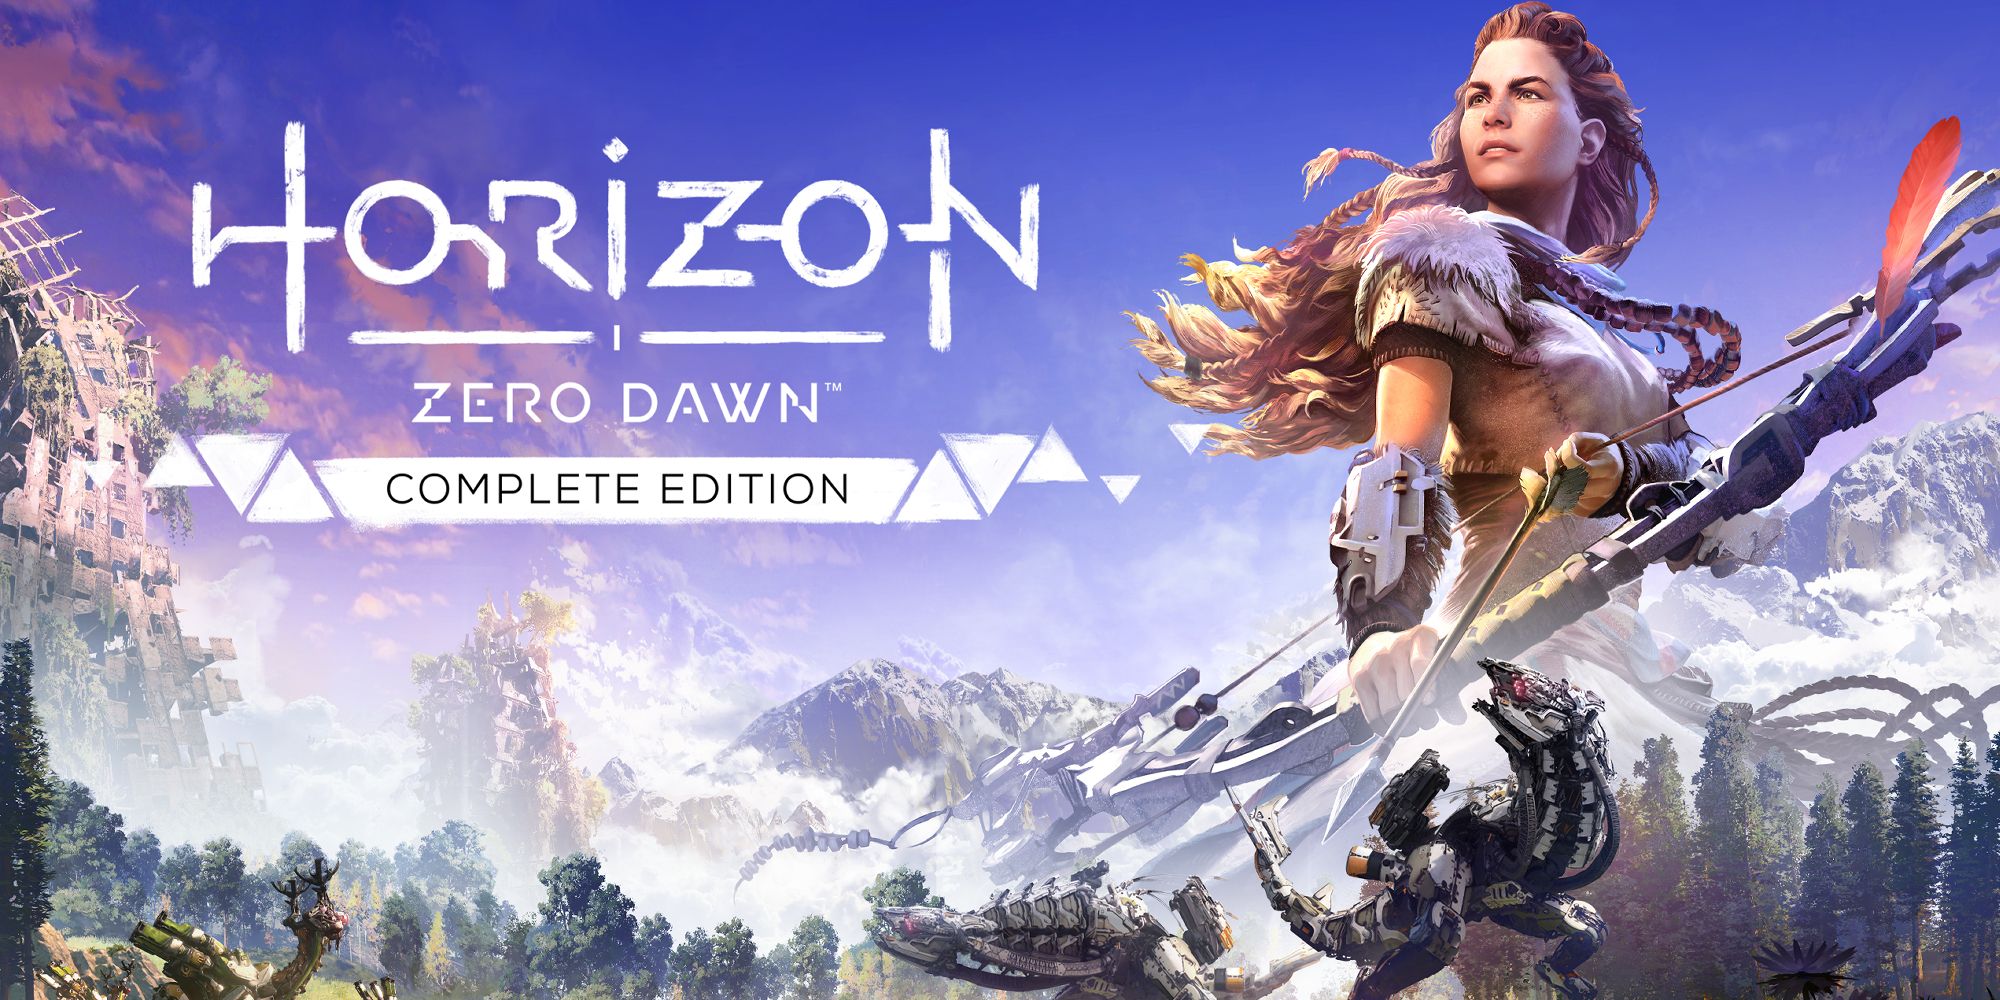 Horizon Zero Dawn cover art for the complete edition, featuring Aloy with her bow and a Scrapper machine below her